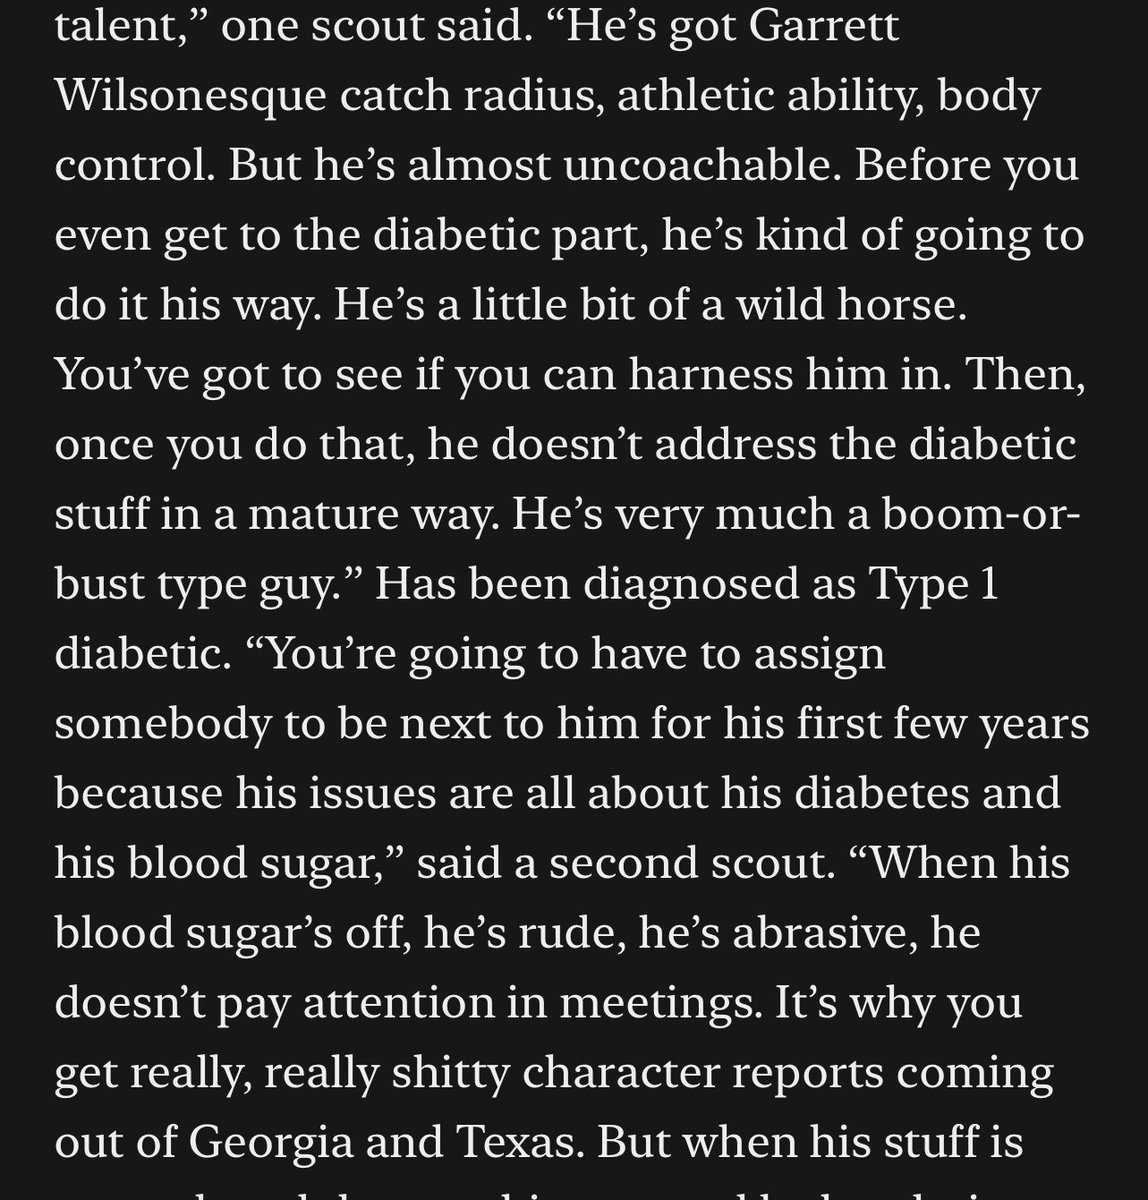 I found this to be really interesting from @BobMcGinn on #Texas WR AD Mitchell. Apparently, he’s been diagnosed with Type 1 diabetes: open.substack.com/pub/golongtd/p…